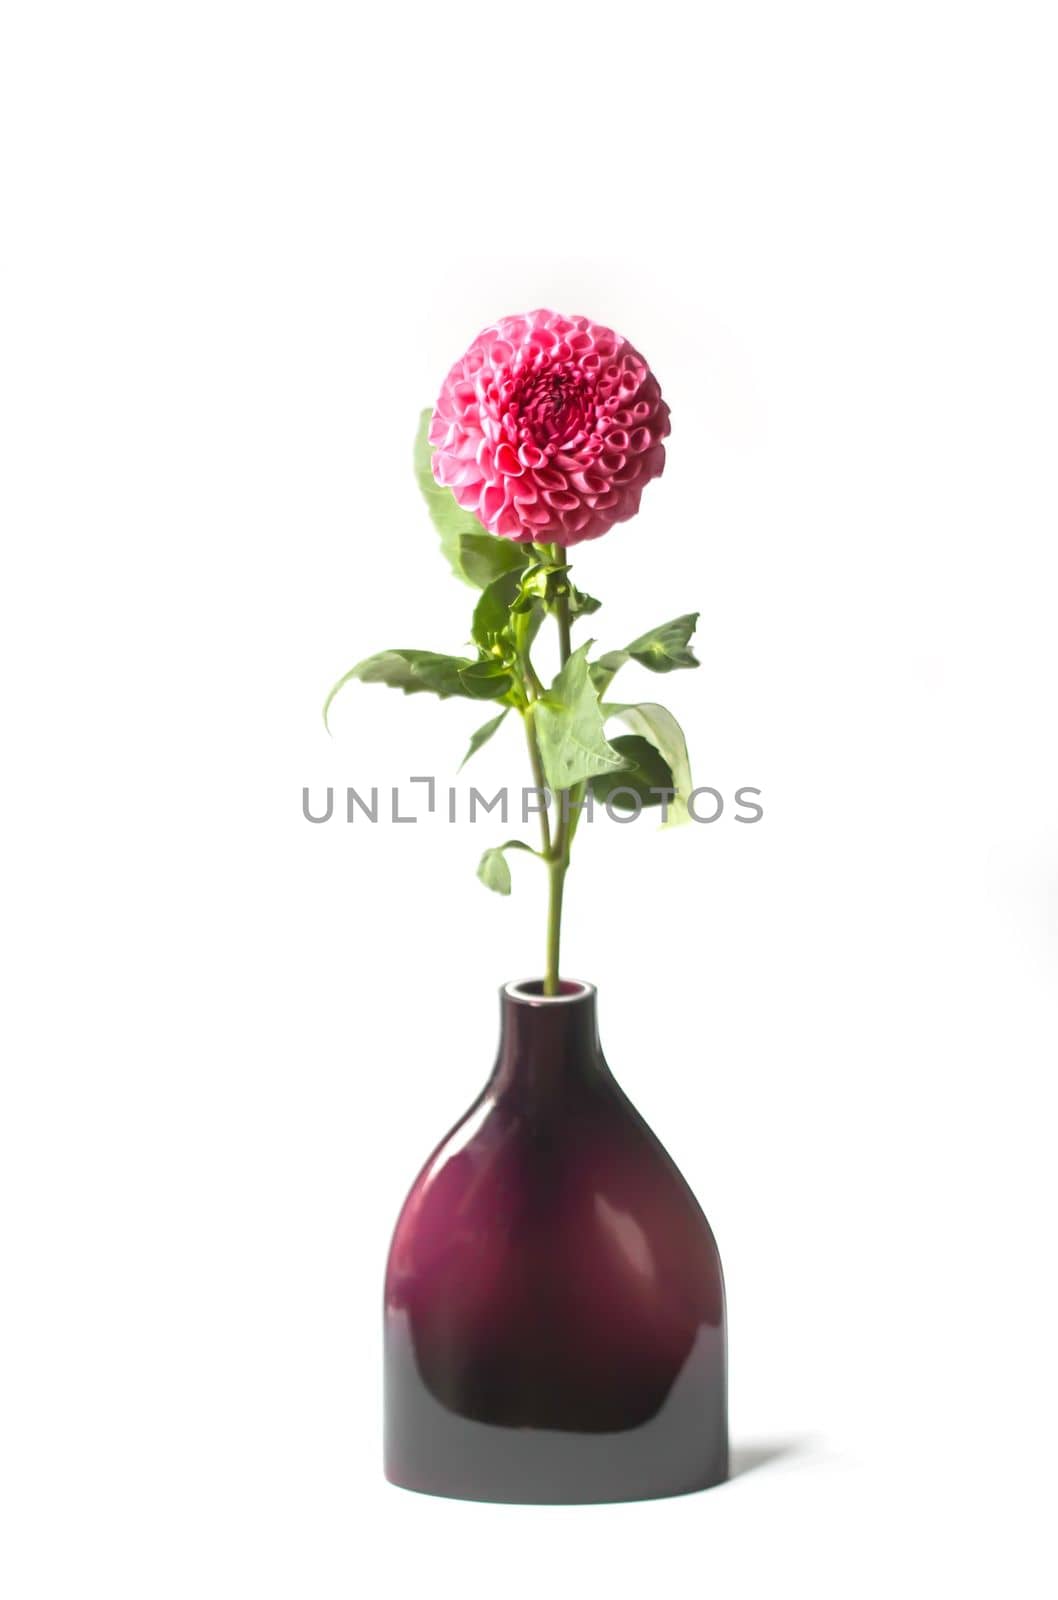 Beautiful pink dahlia flower in a vase. Beautiful plant flowering at summer. by nightlyviolet